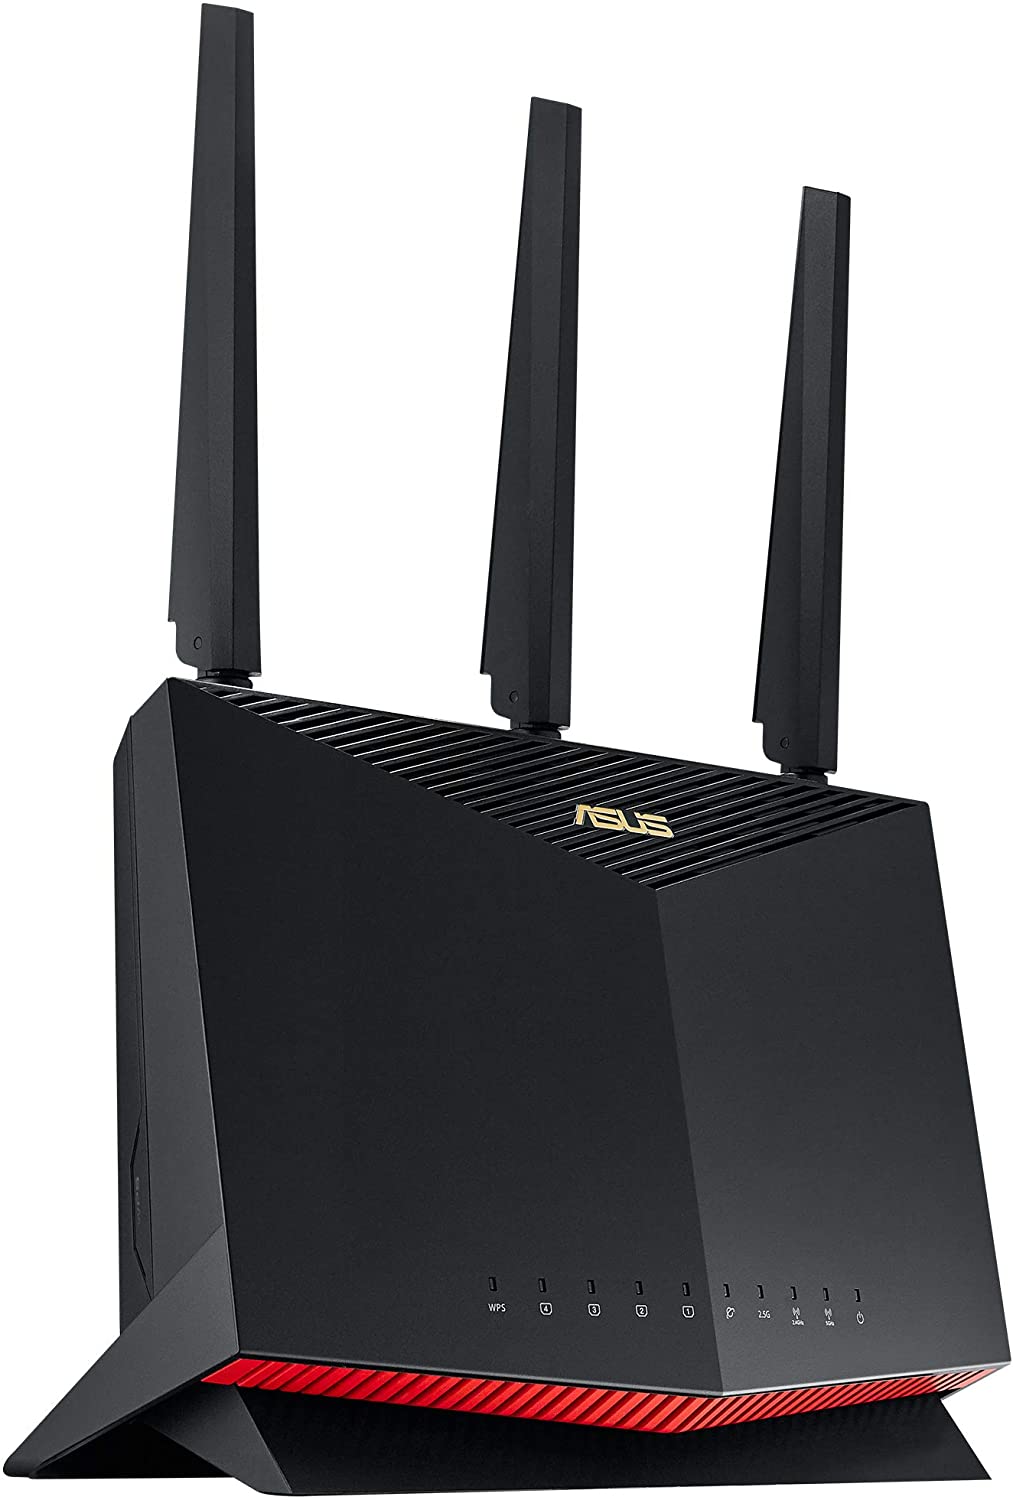 ASUS AX5700 WiFi 6 Gaming Router (RT-AX86U) - Dual Band Gigabit Wireless Internet Router, NVIDIA GeForce NOW, 2.5G Port, Gaming & Streaming, AiMesh Compatible, Included Lifetime Internet Security